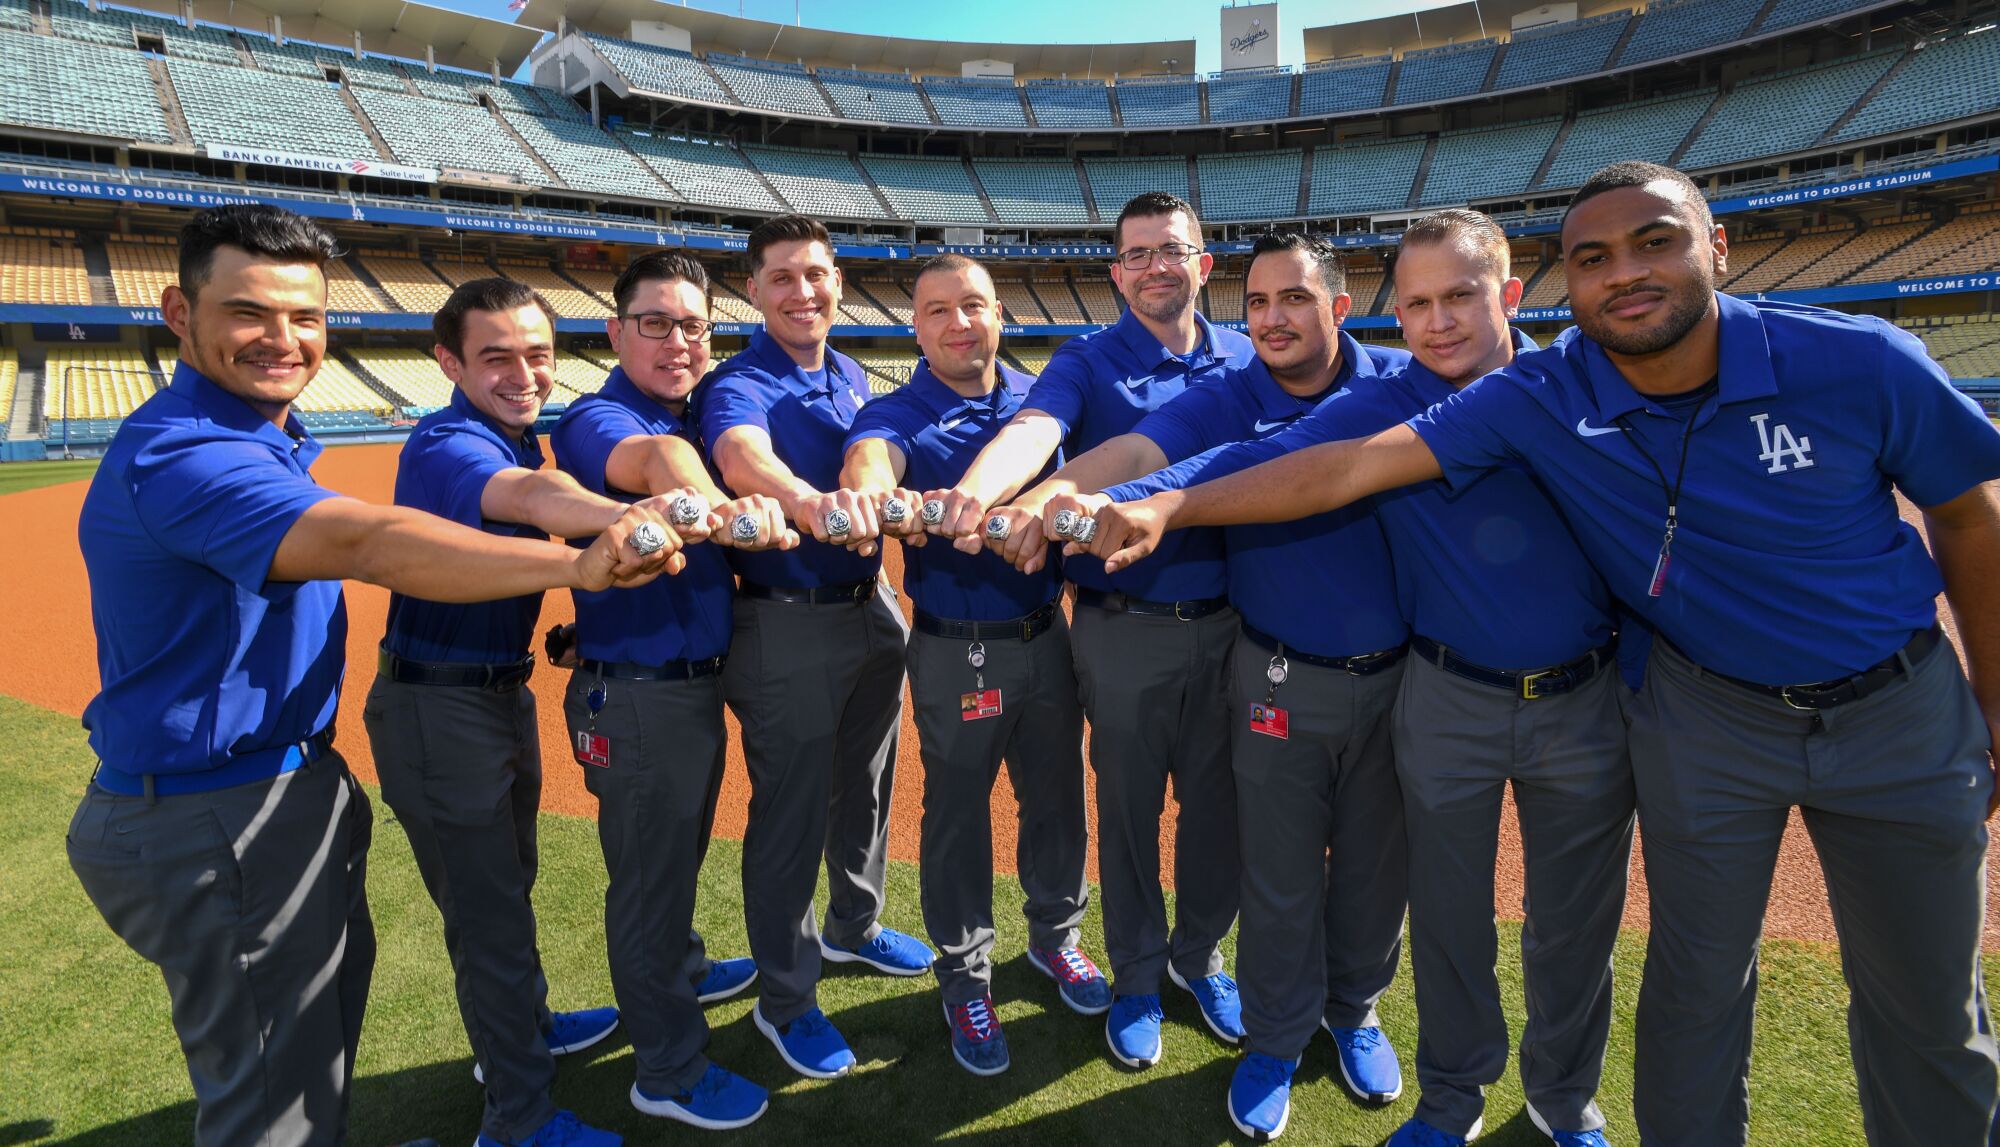 Dodgers clubhouse attendants and bat boys display their 2020 World Series rings.